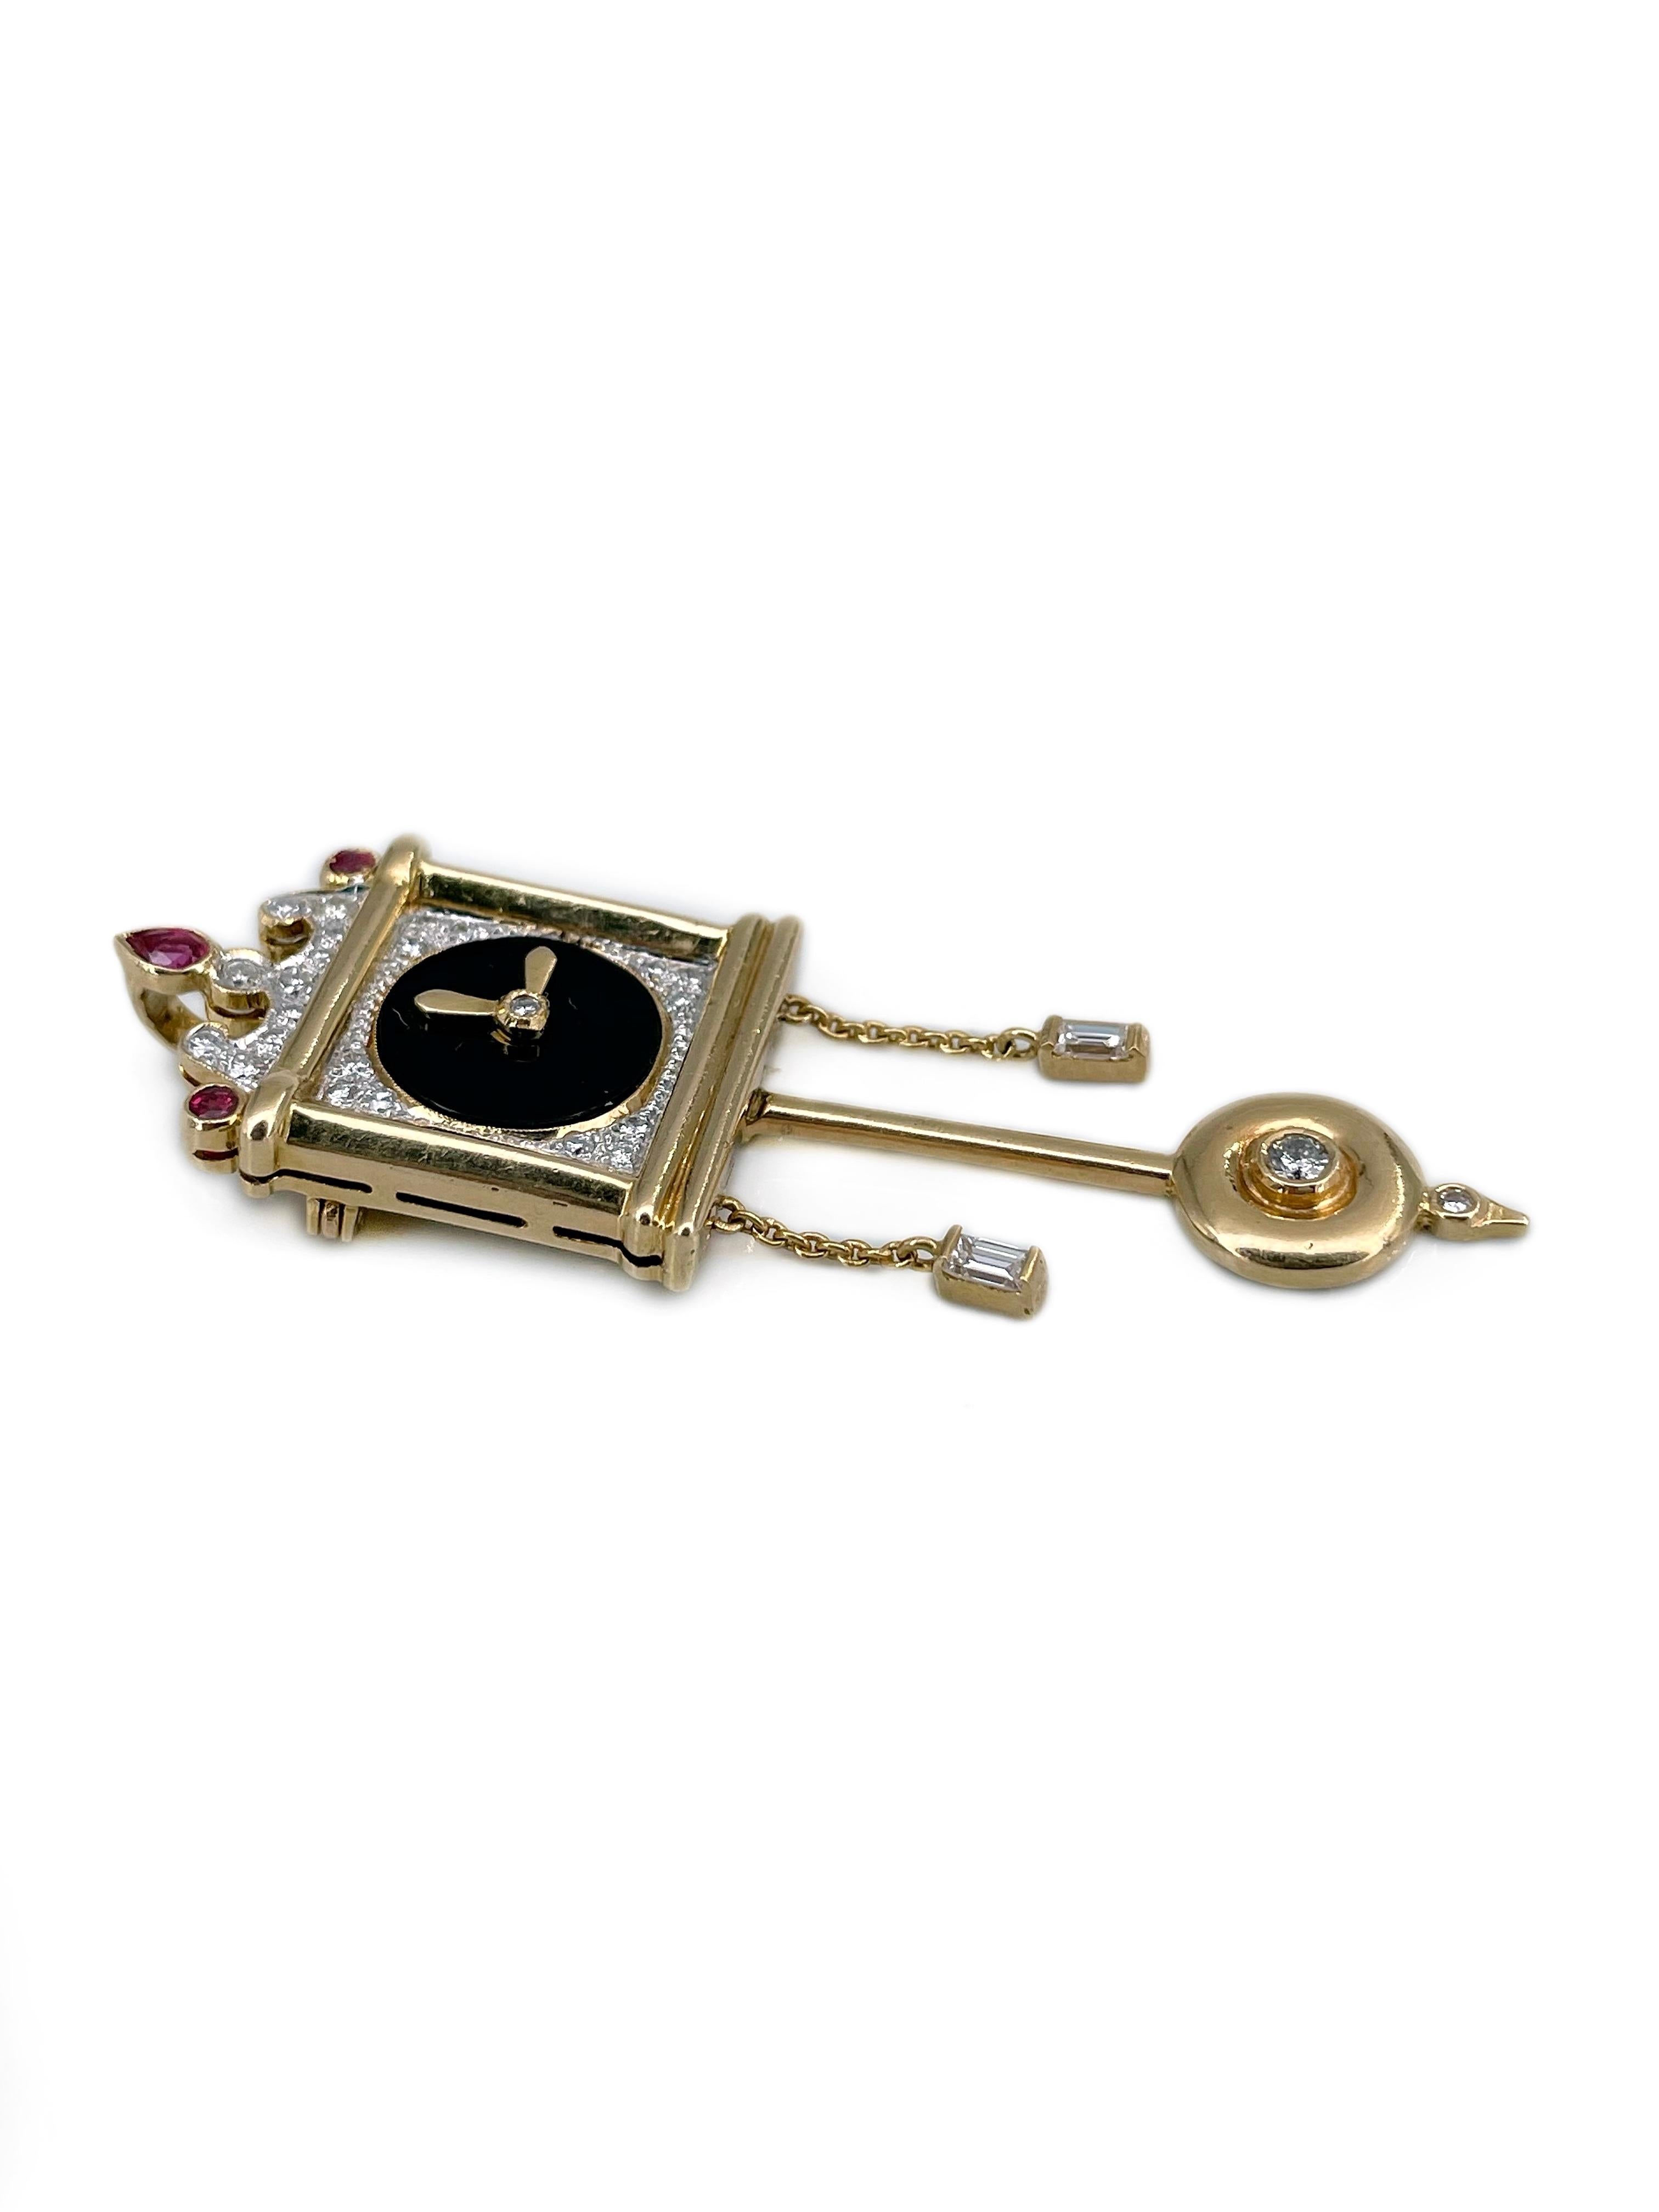 This is a vintage wall clock shape pendant-brooch crafted in 18K yellow gold. Circa 1960. 

The piece features: 
- 25 diamonds (round brilliant cut, TW 0.28ct, RW+/STW, VS-SI)
- 2 diamonds (rectangular step cut, TW 0.10ct, RW+/RW, VS-SI)
- 3 rubies